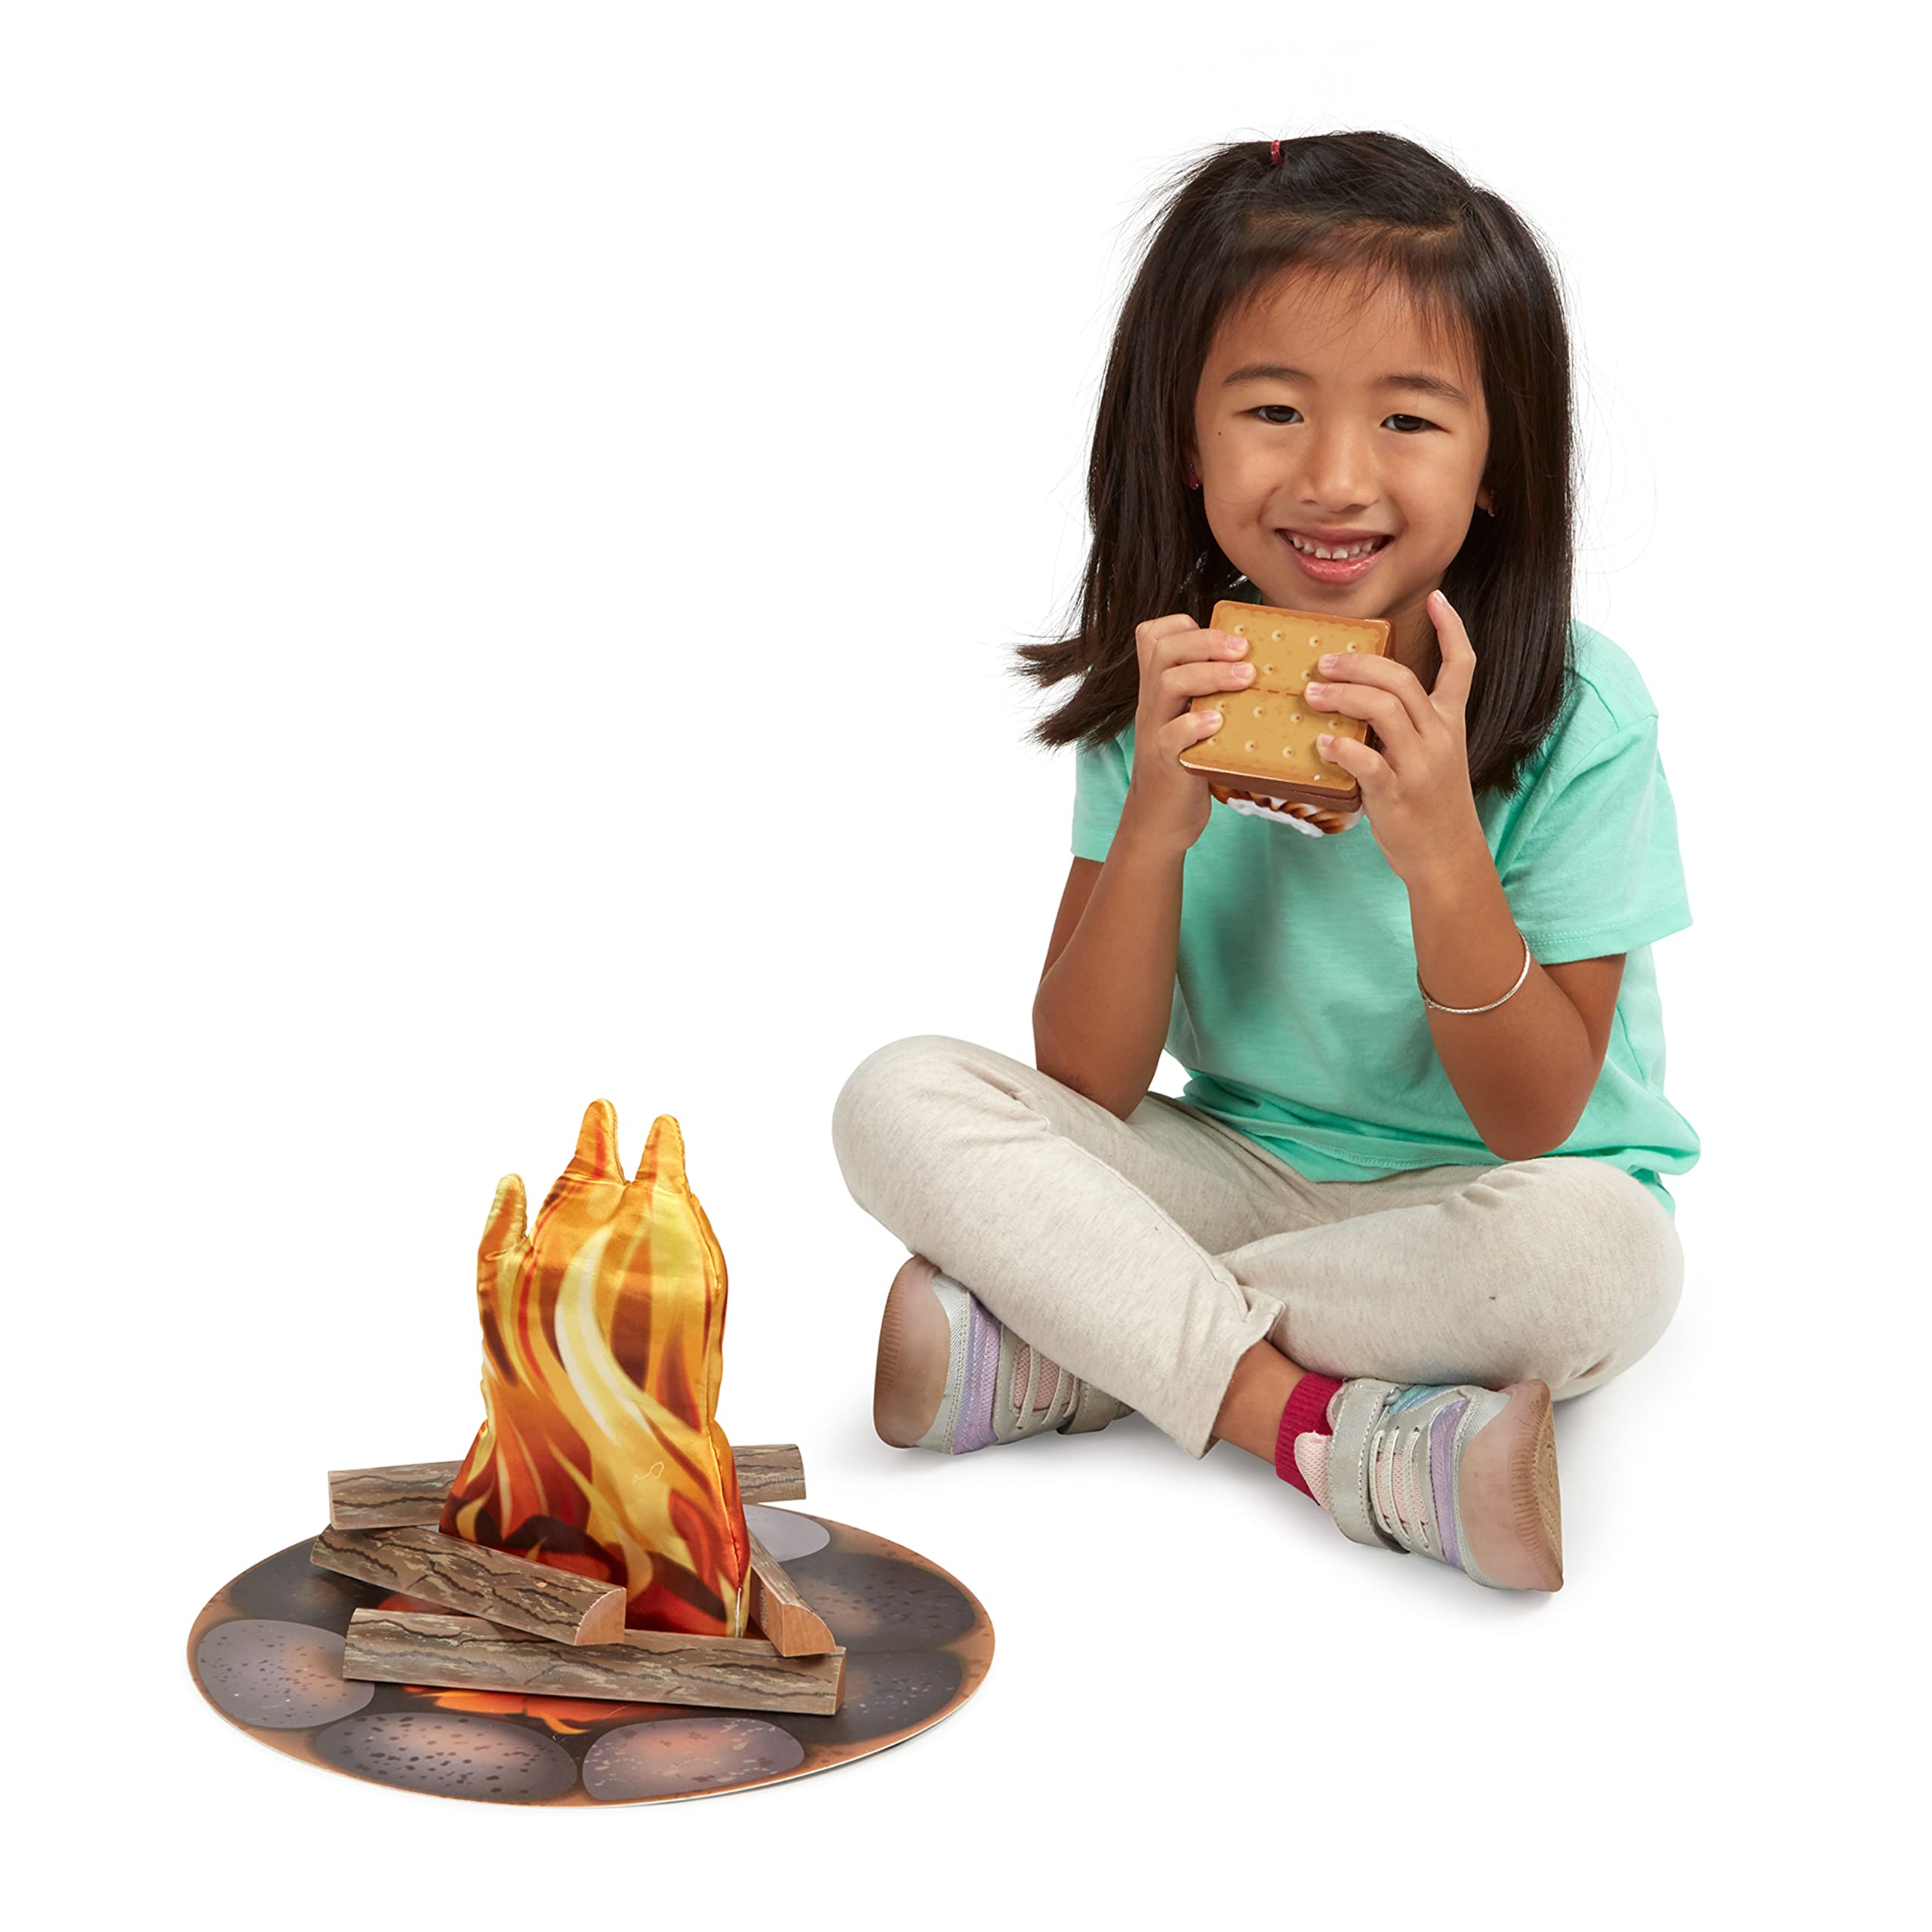 Melissa & Doug Let's Explore Campfire S'Mores Play Set - Play Campfire Sets For Kids Ages 3+